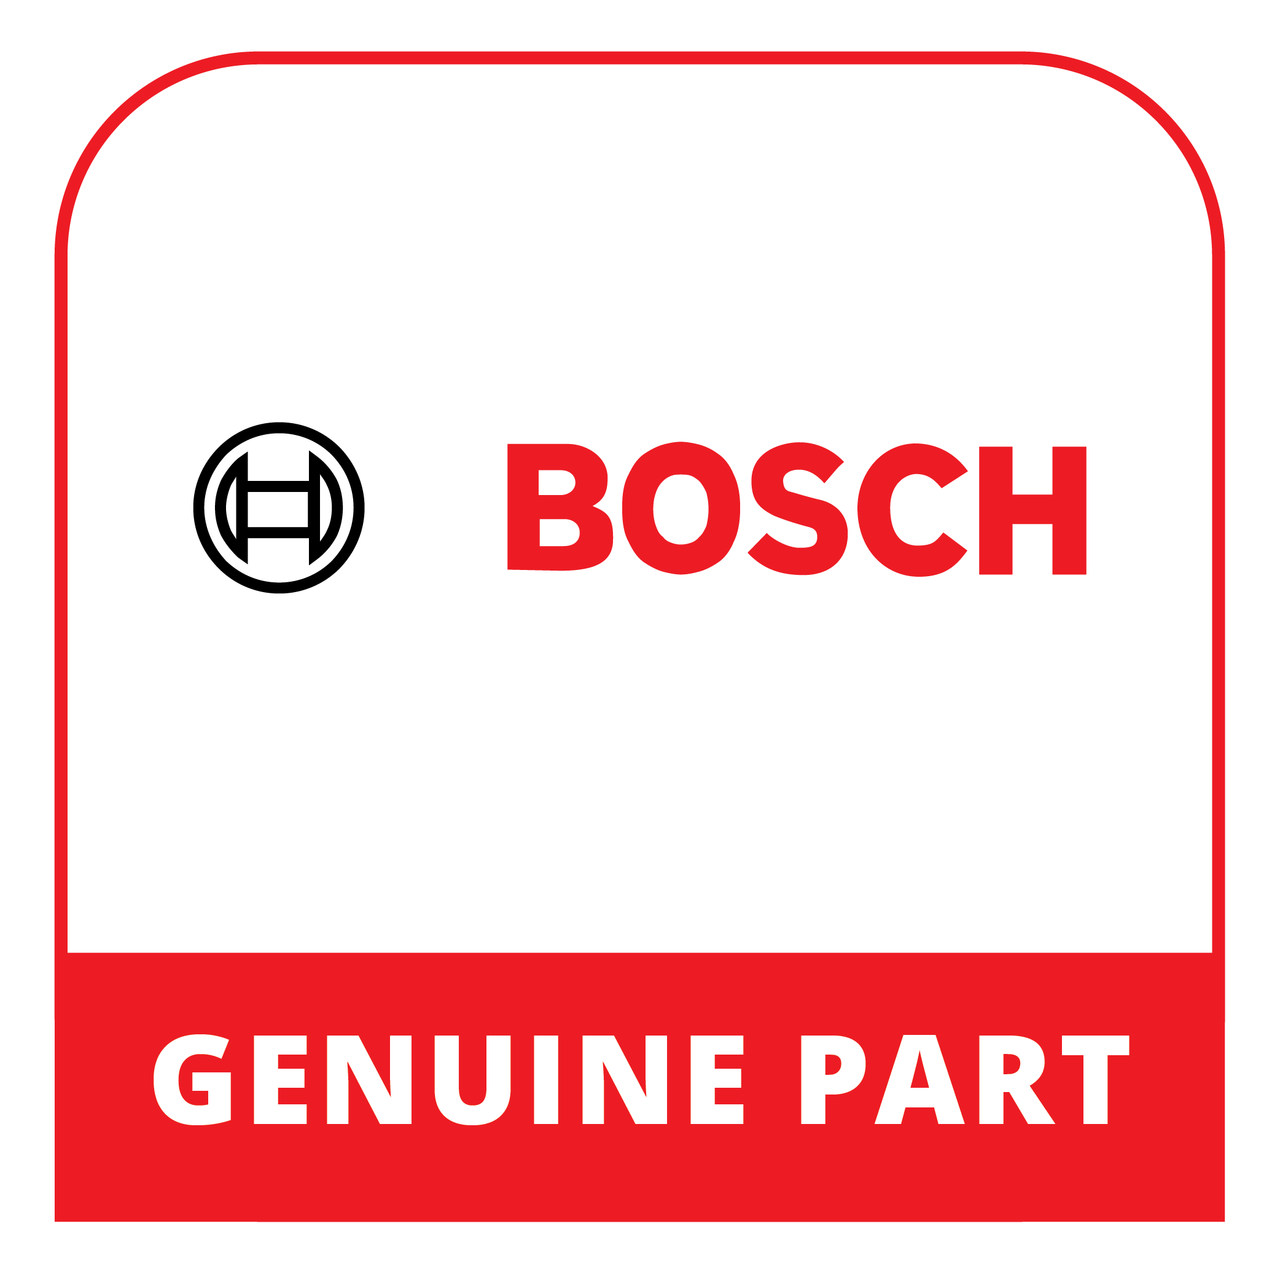 Bosch (Thermador) 00778862 - Panel-Base - Genuine Bosch (Thermador) Part